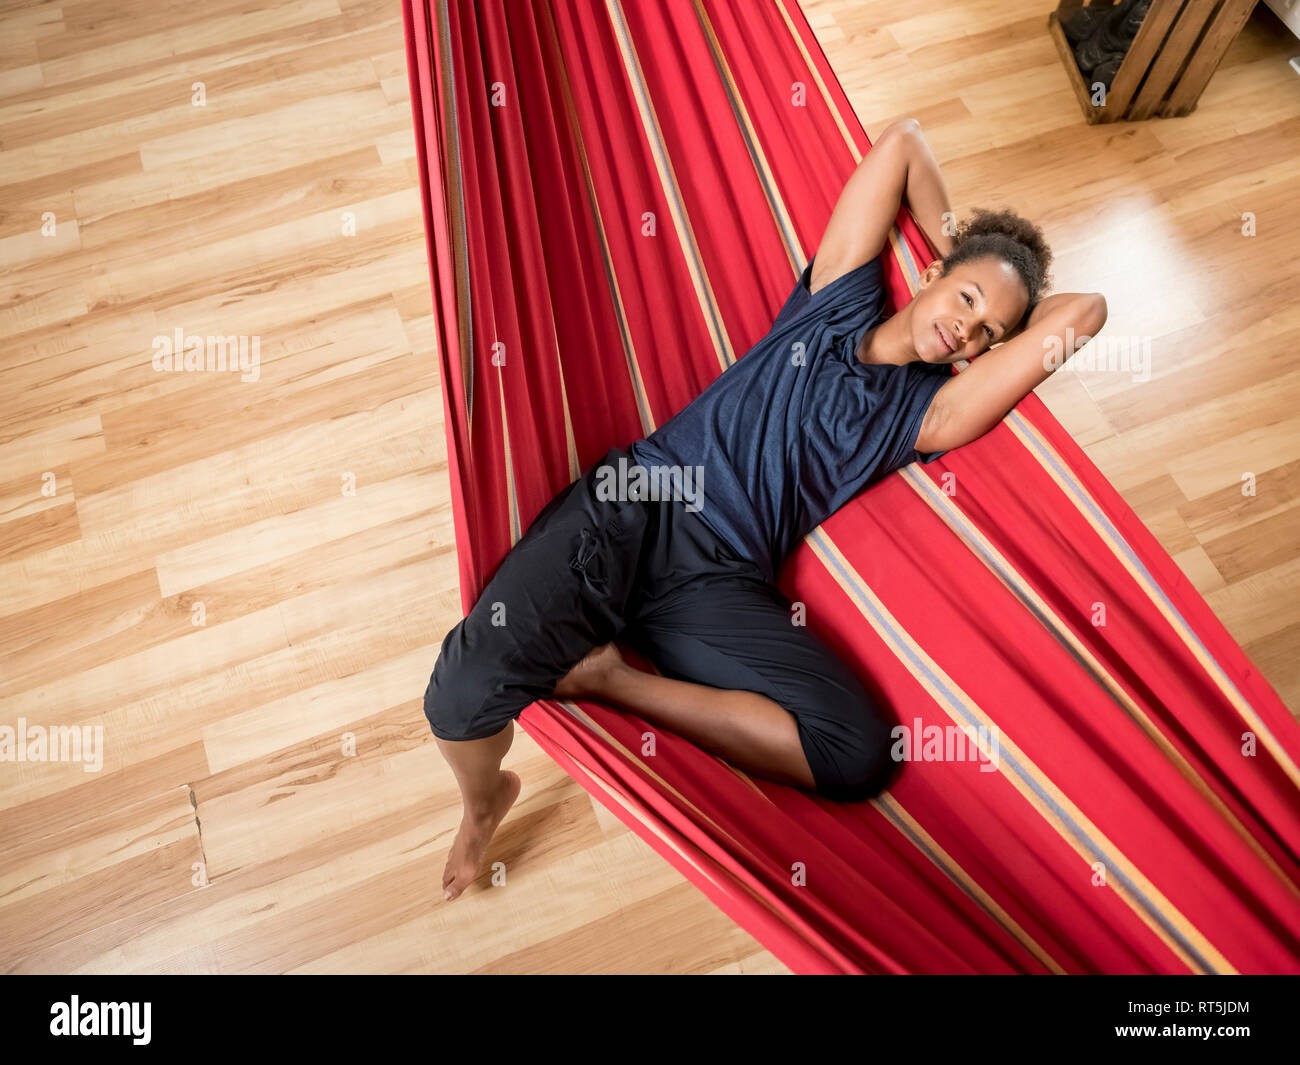 Overhead view of young woman lying in hammock Banque D'Images